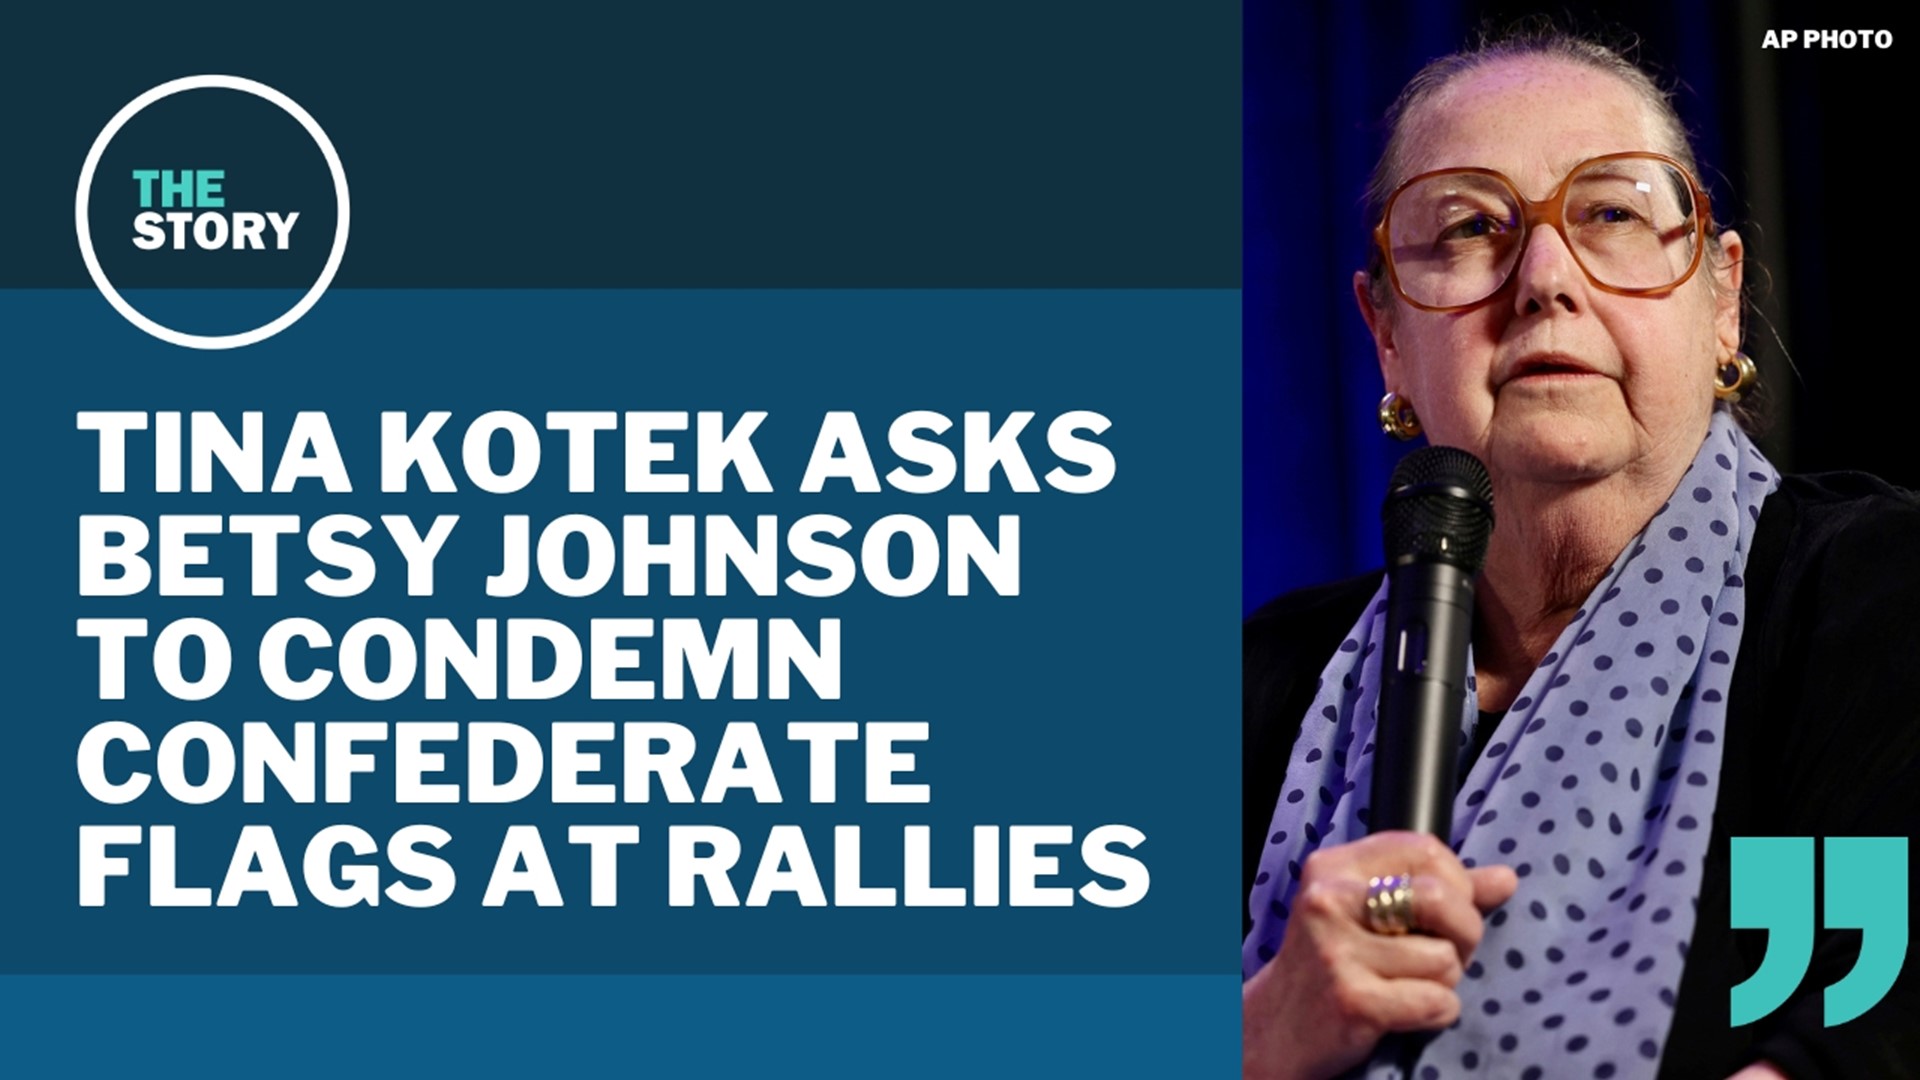 Johnson, the unaffiliated candidate running for Oregon governor, was challenged by Democrat Tina Kotek to condemn the flag after a question at their first debate.